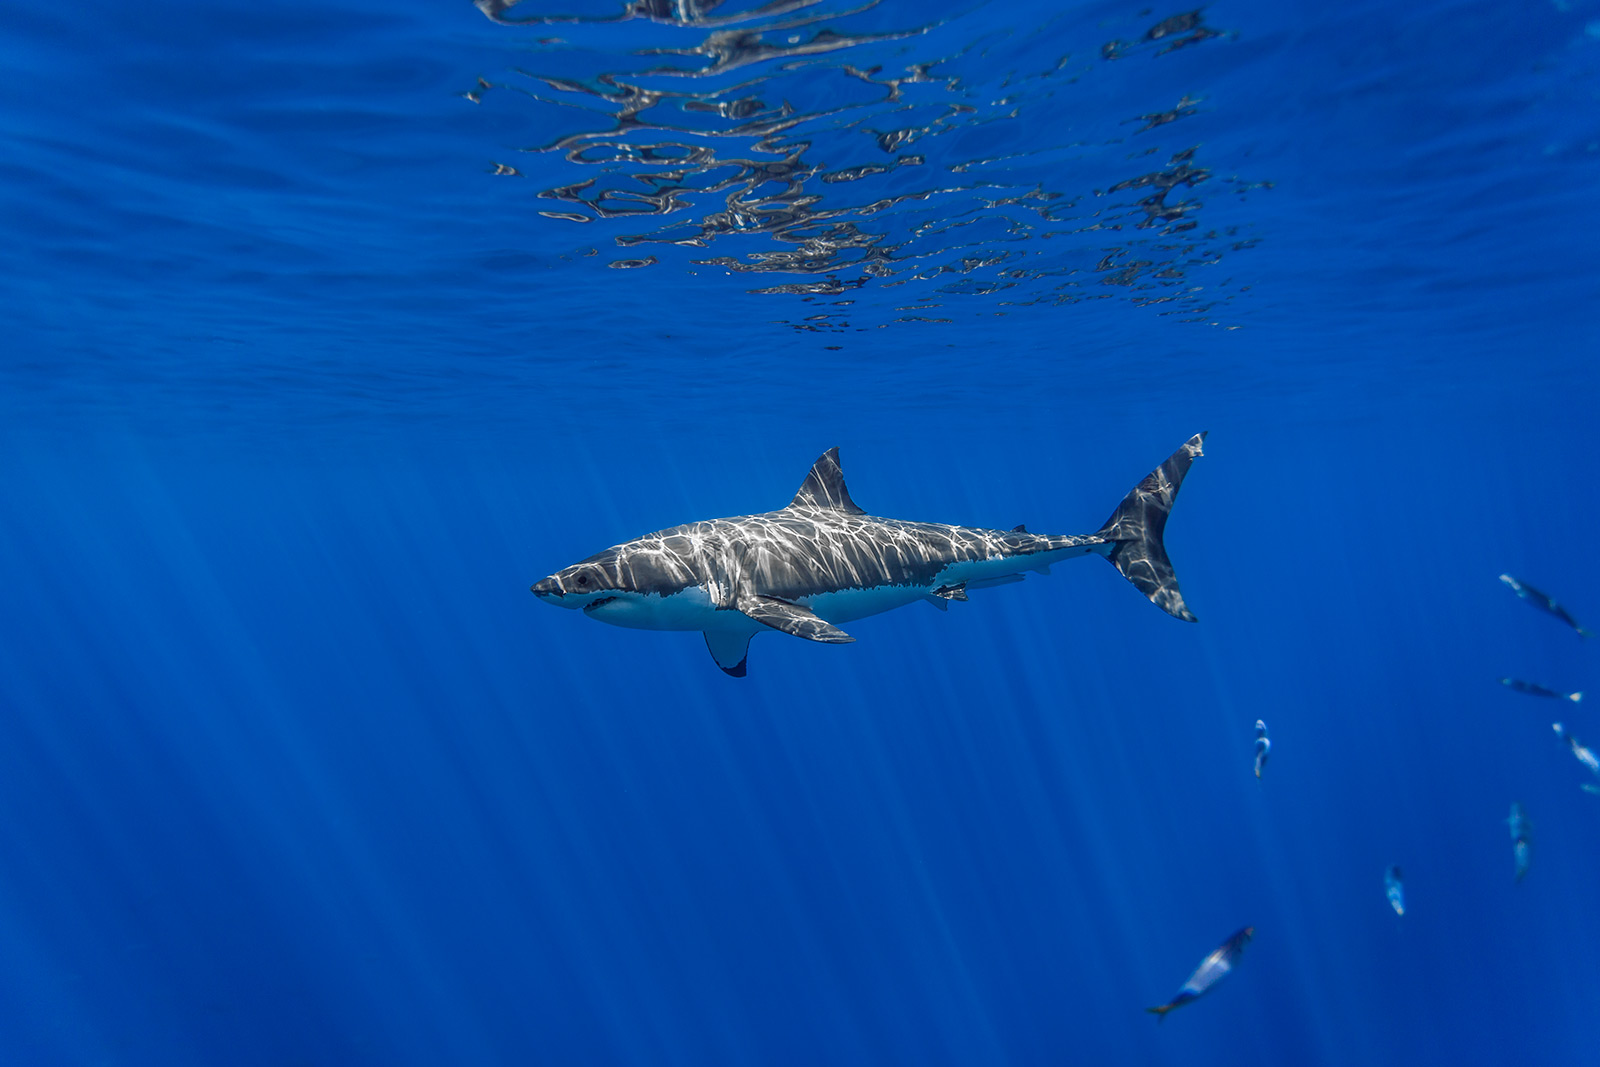 a male great white shark in the distance image